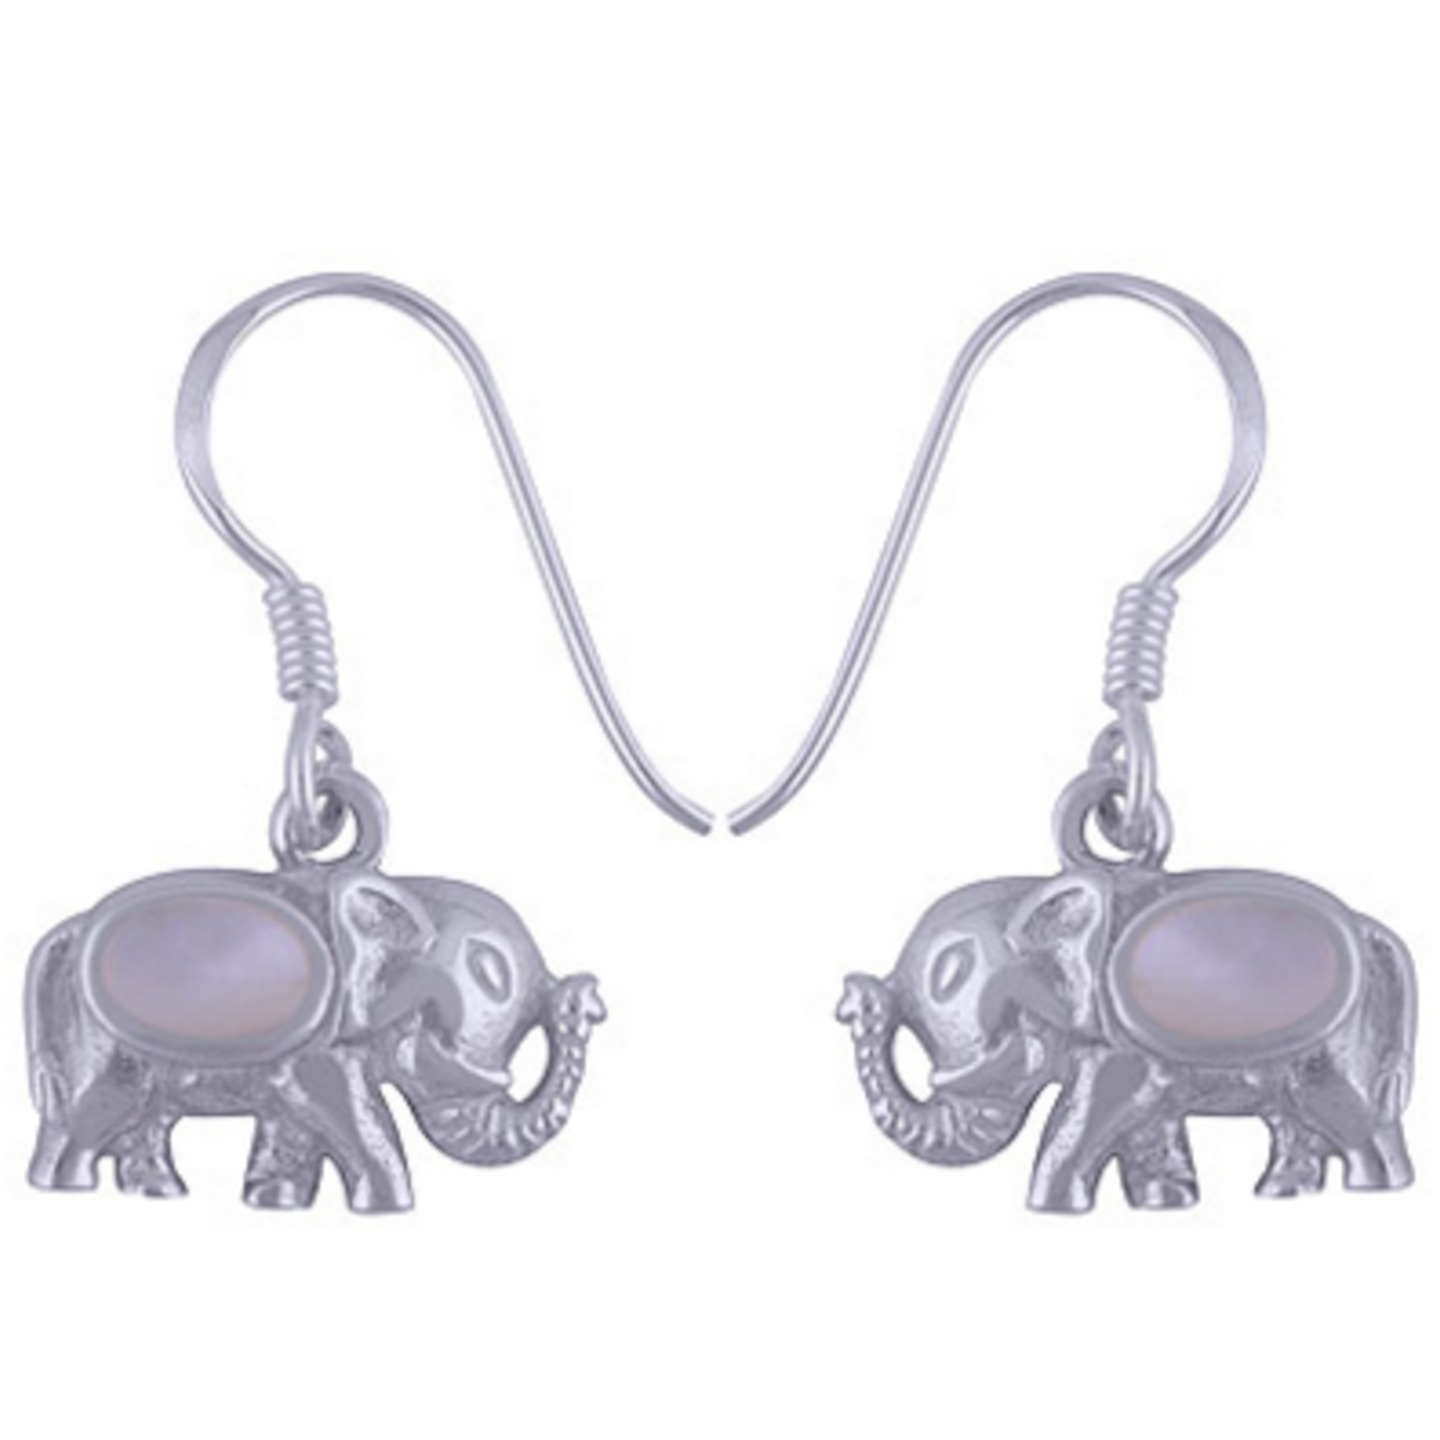 The Tusker Glory Silver Earring